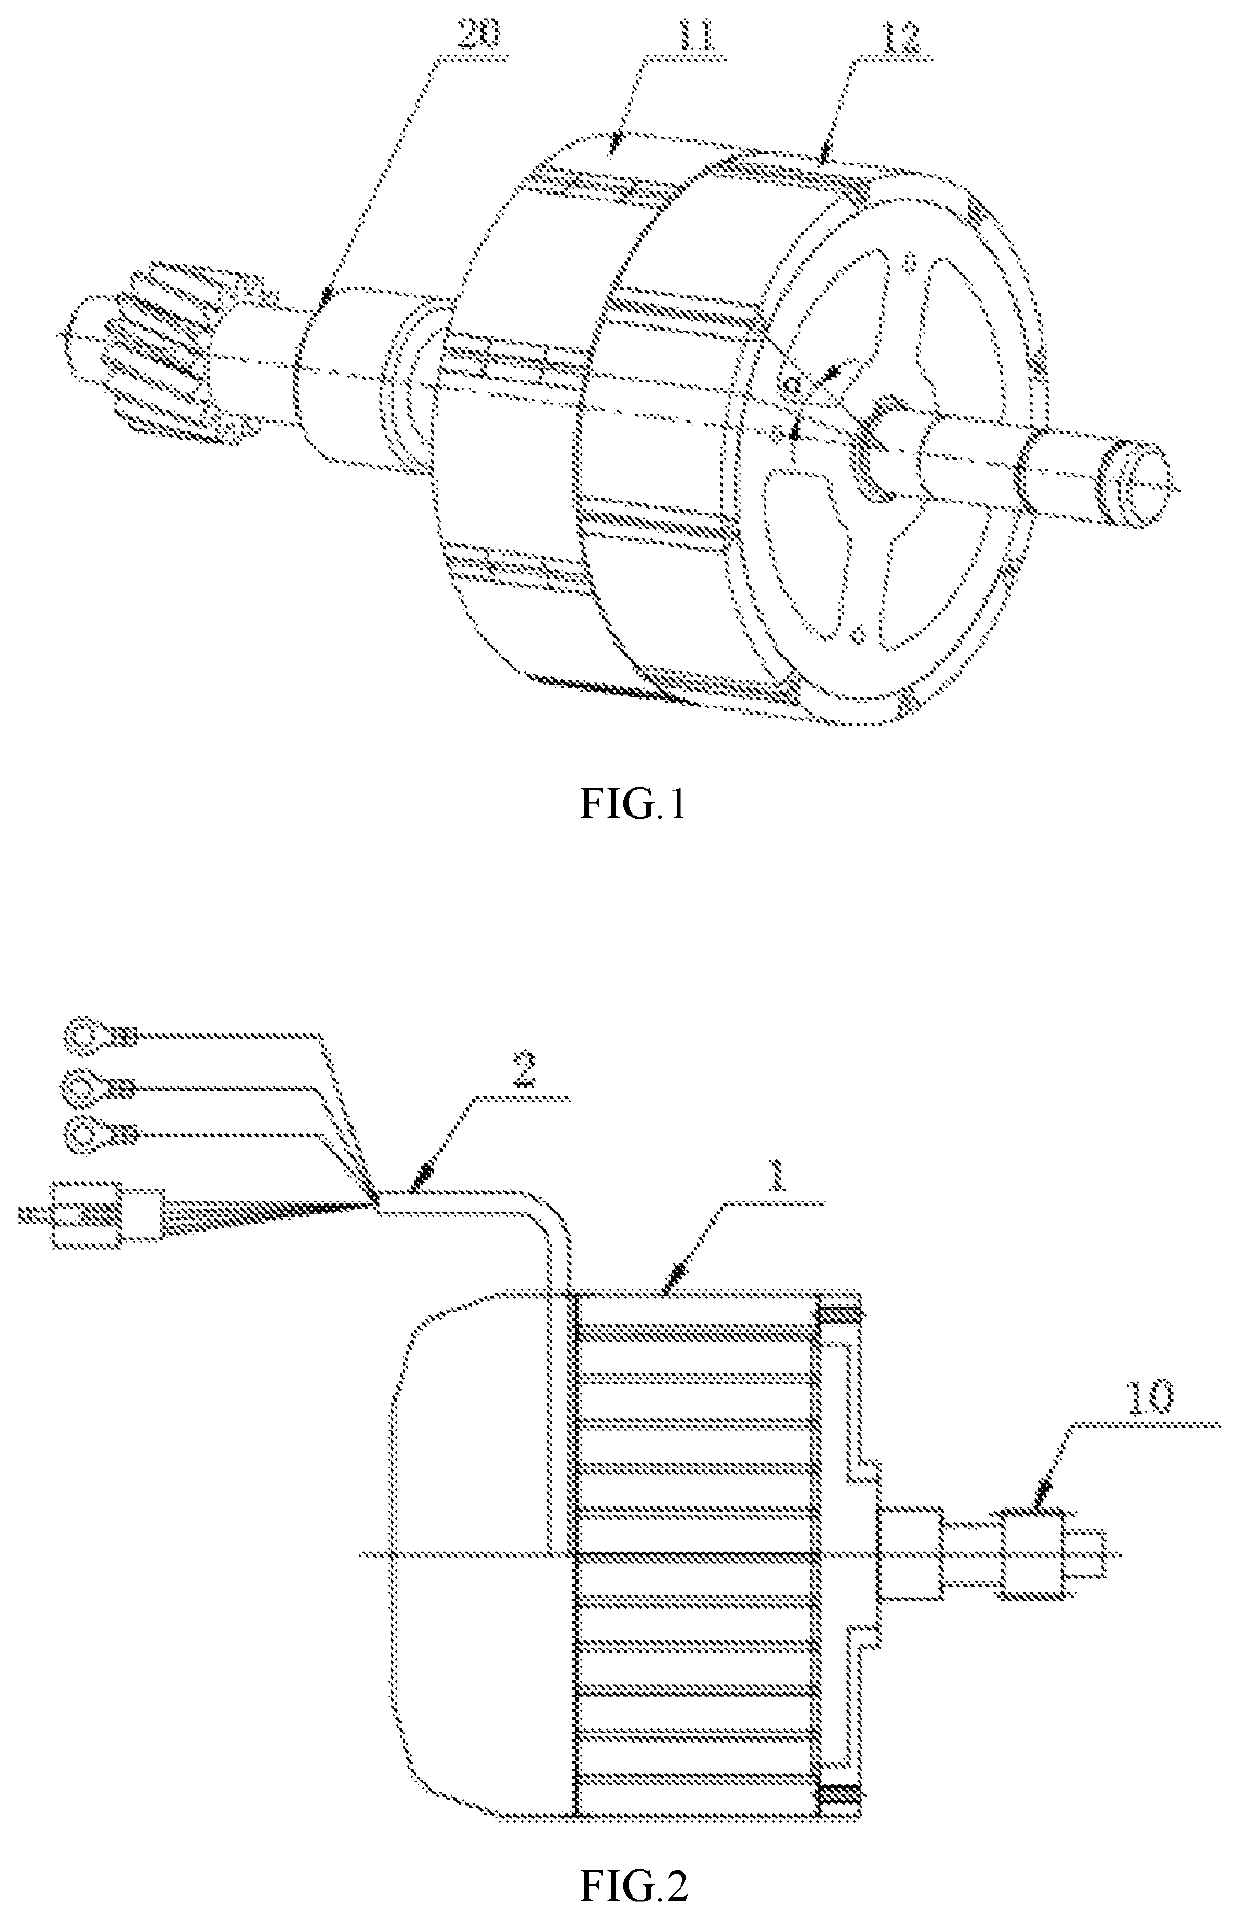 Automatic torque-adjustable speed-changing motor for electric pedicab